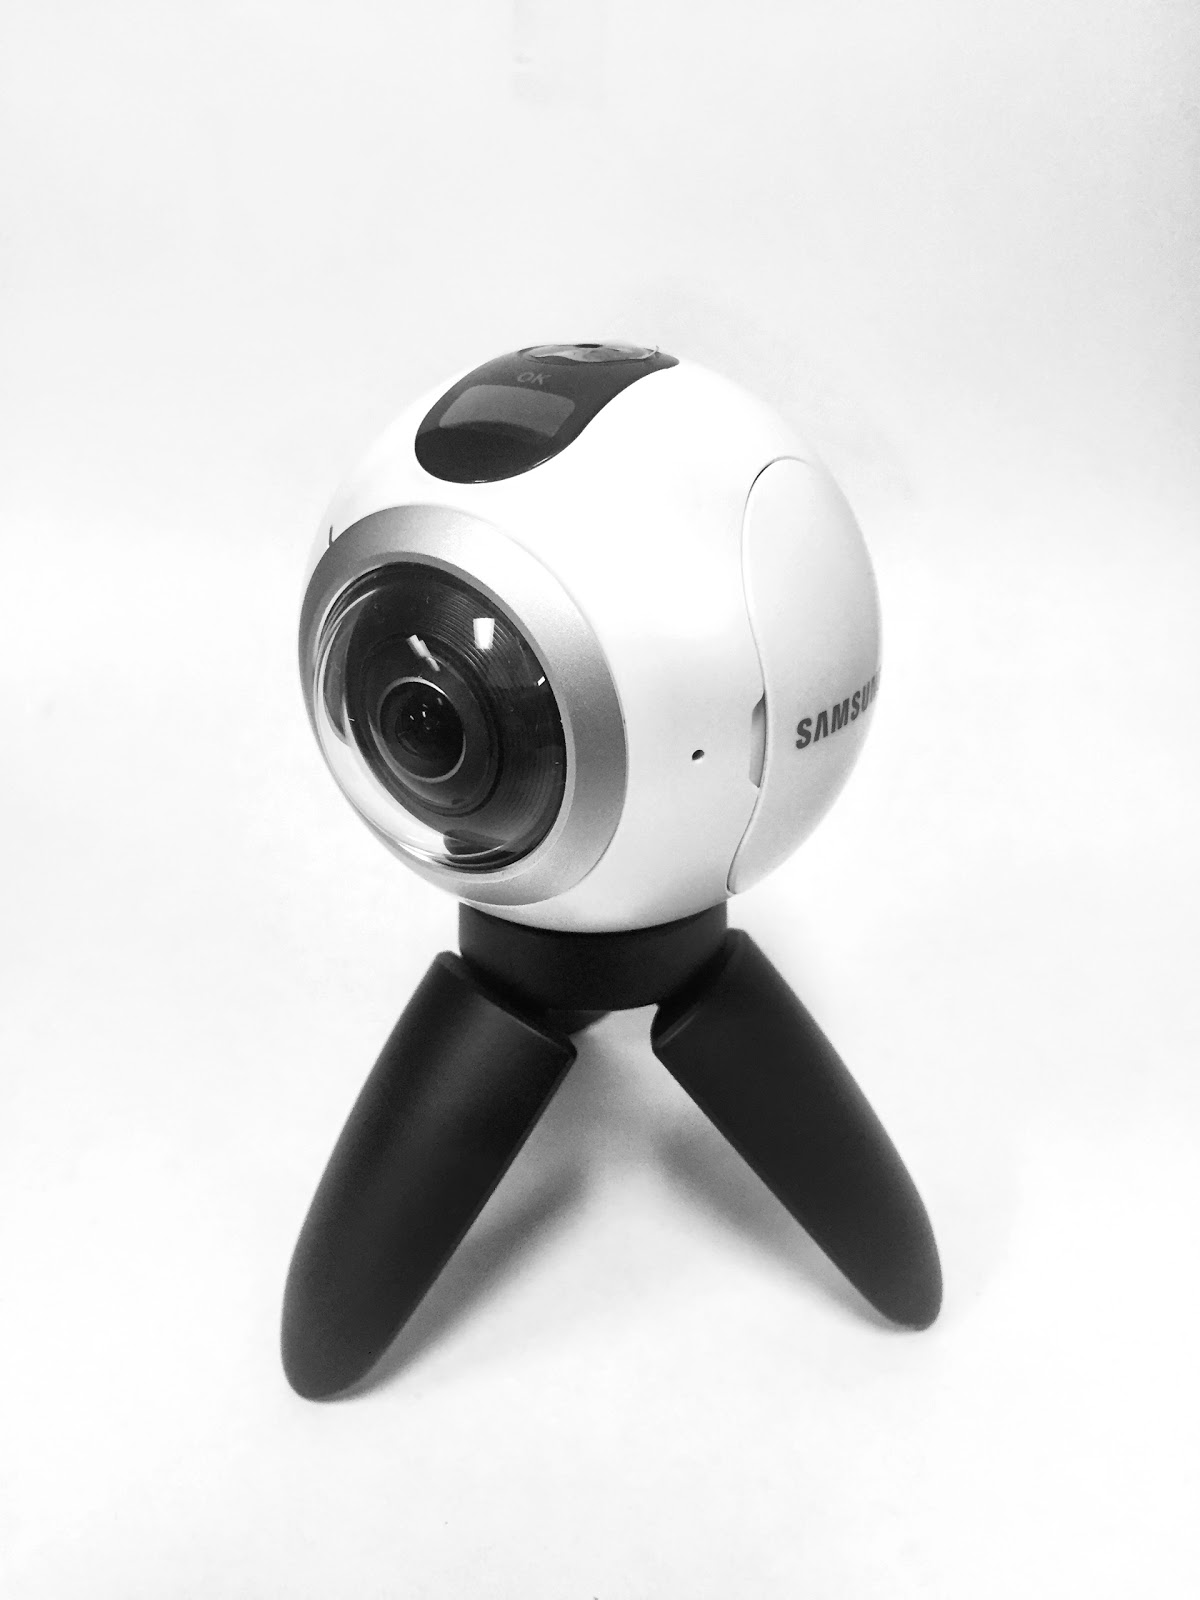 Samsung Gear 360 2016 Detailed HandsOn Review and Guide